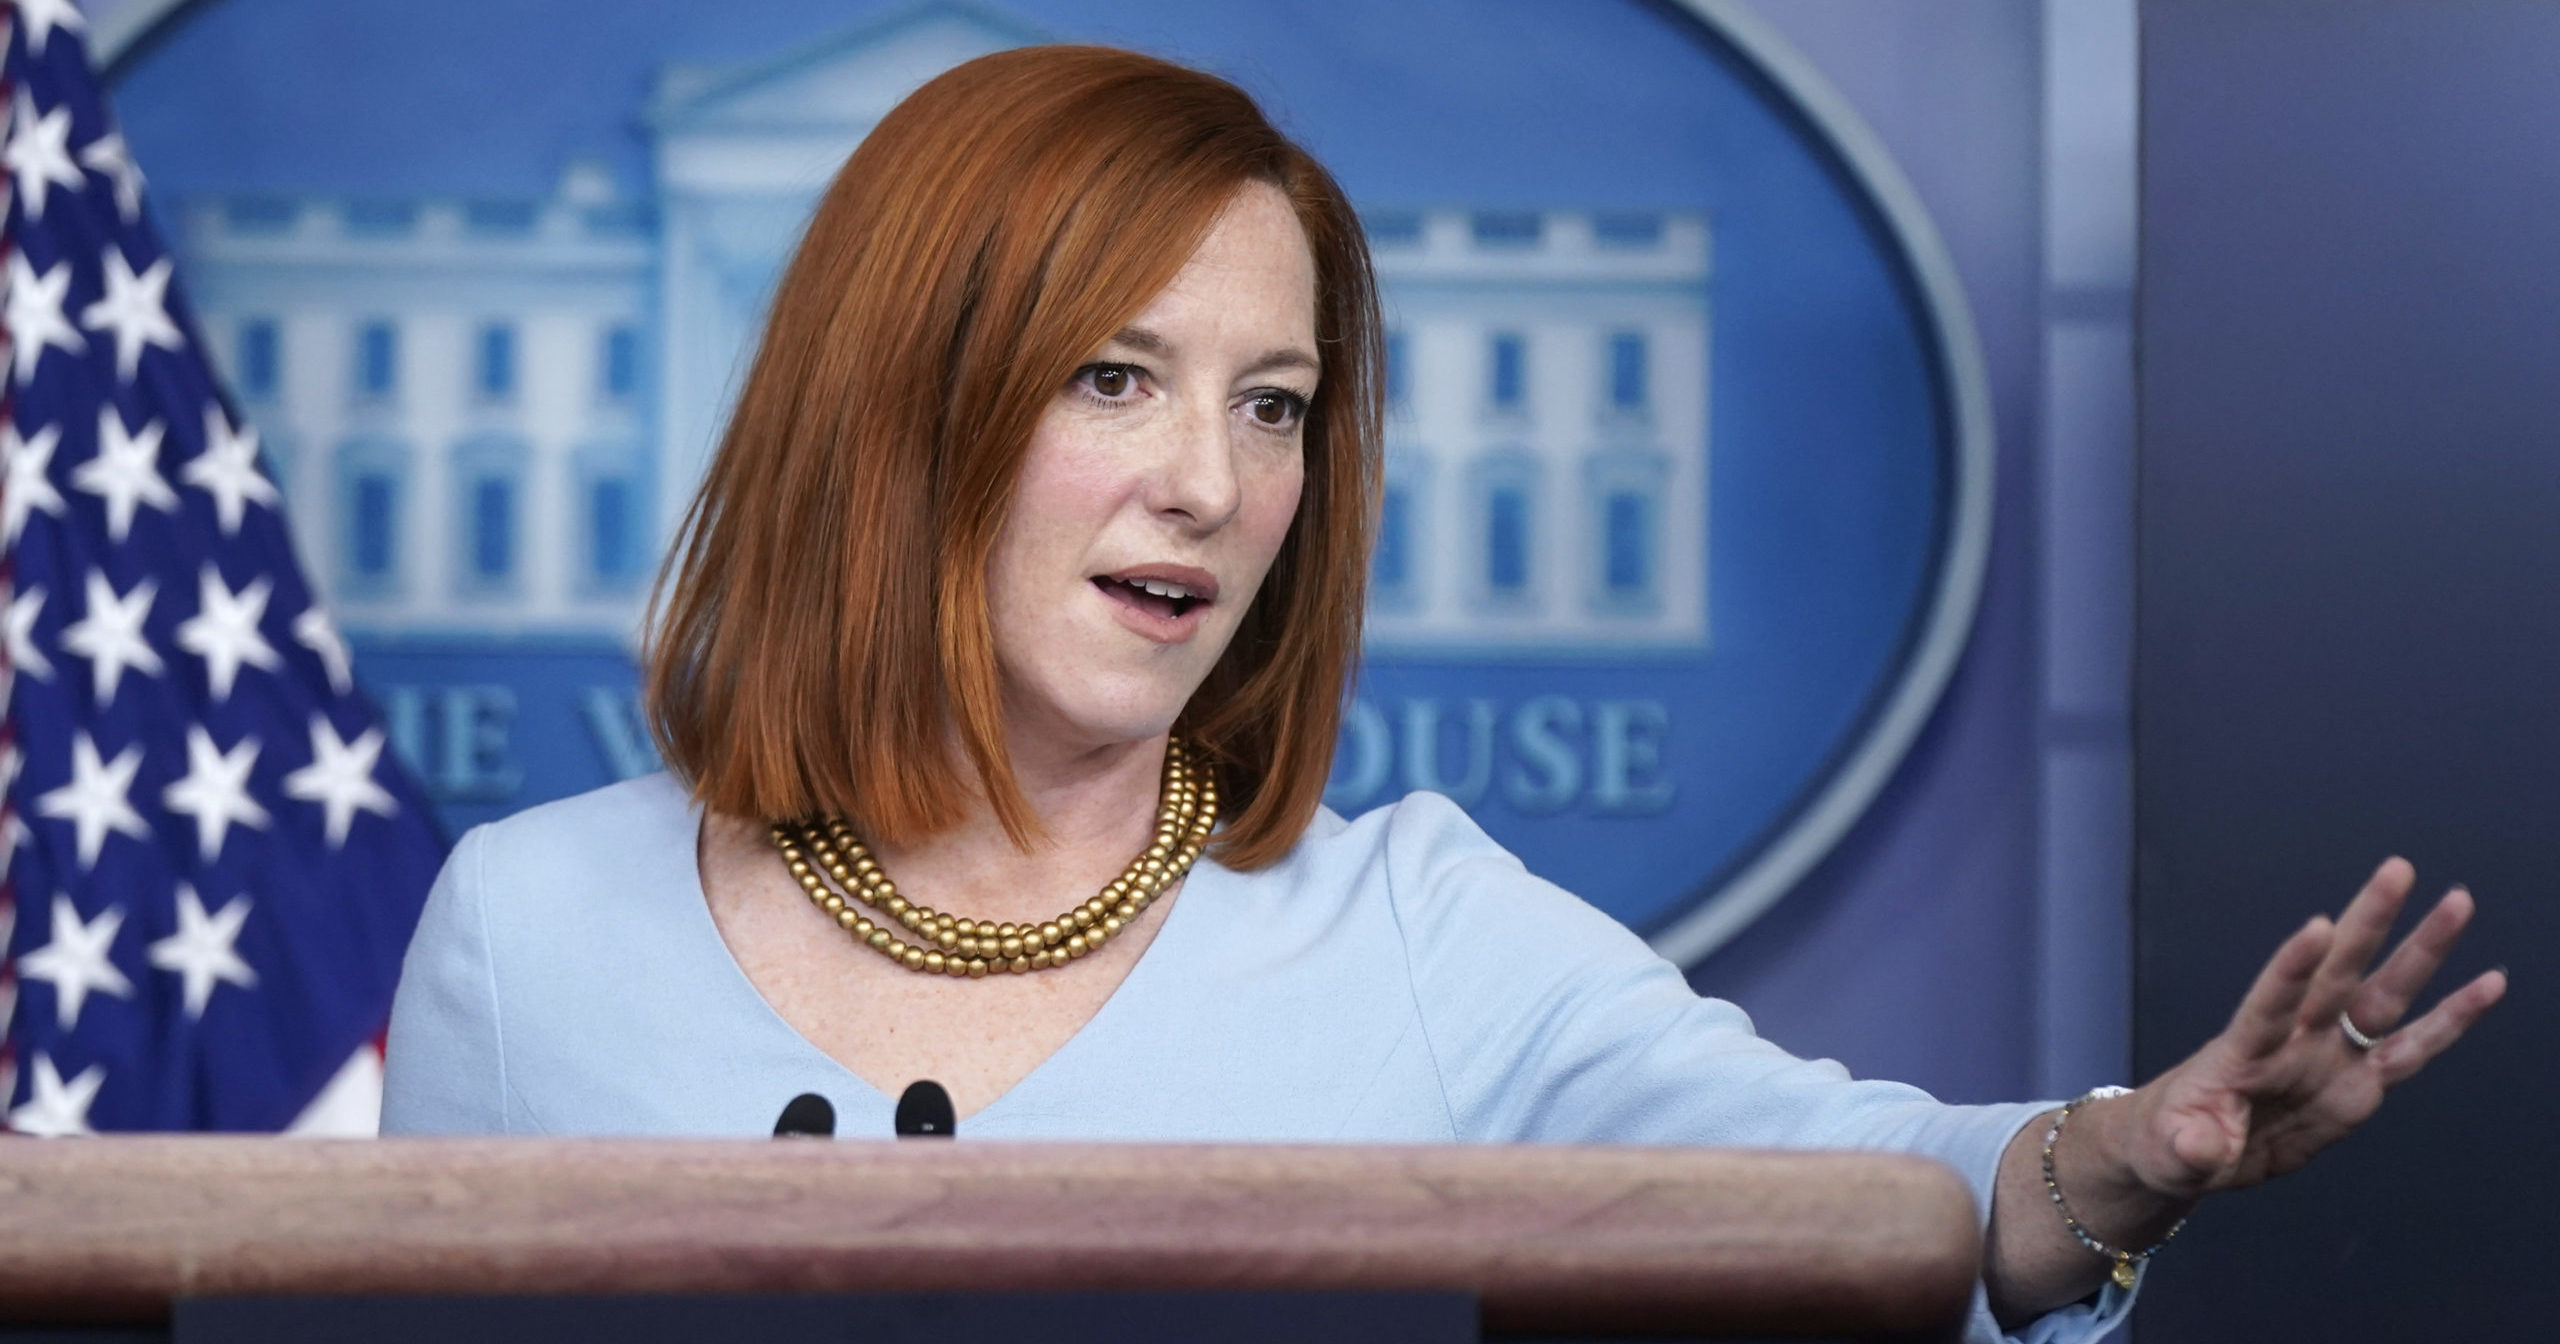 White House press secretary Jen Psaki speaks during a news briefing at the White House on Feb. 10, 2021, in Washington, D.C.